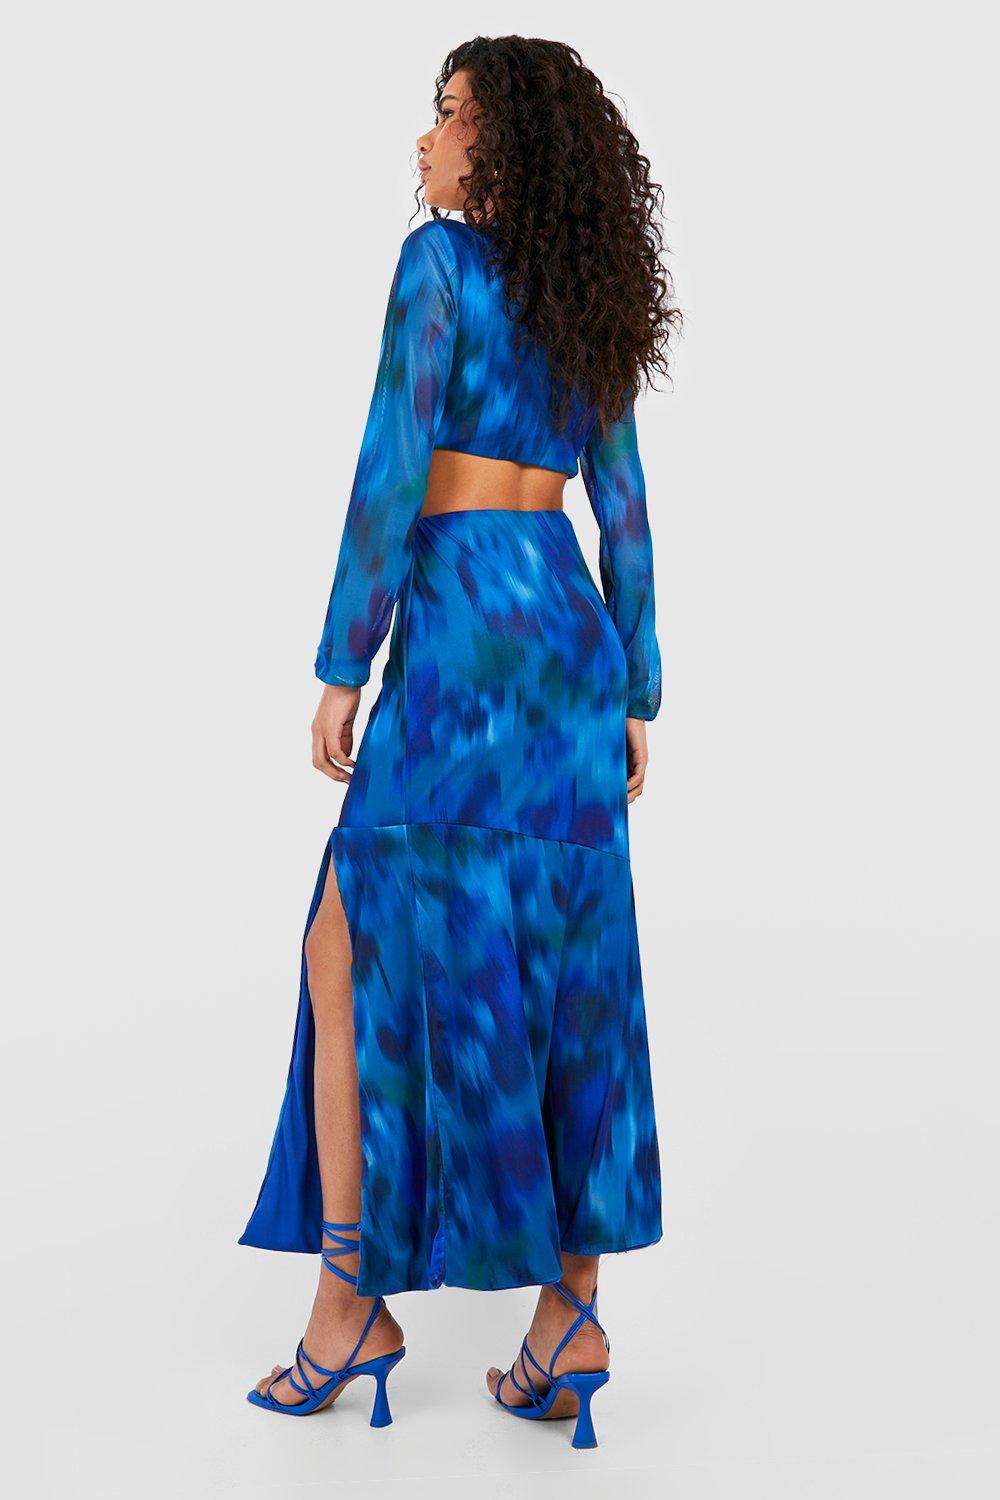 Blue Floral Maxi Dress With Cut Outs And Slit